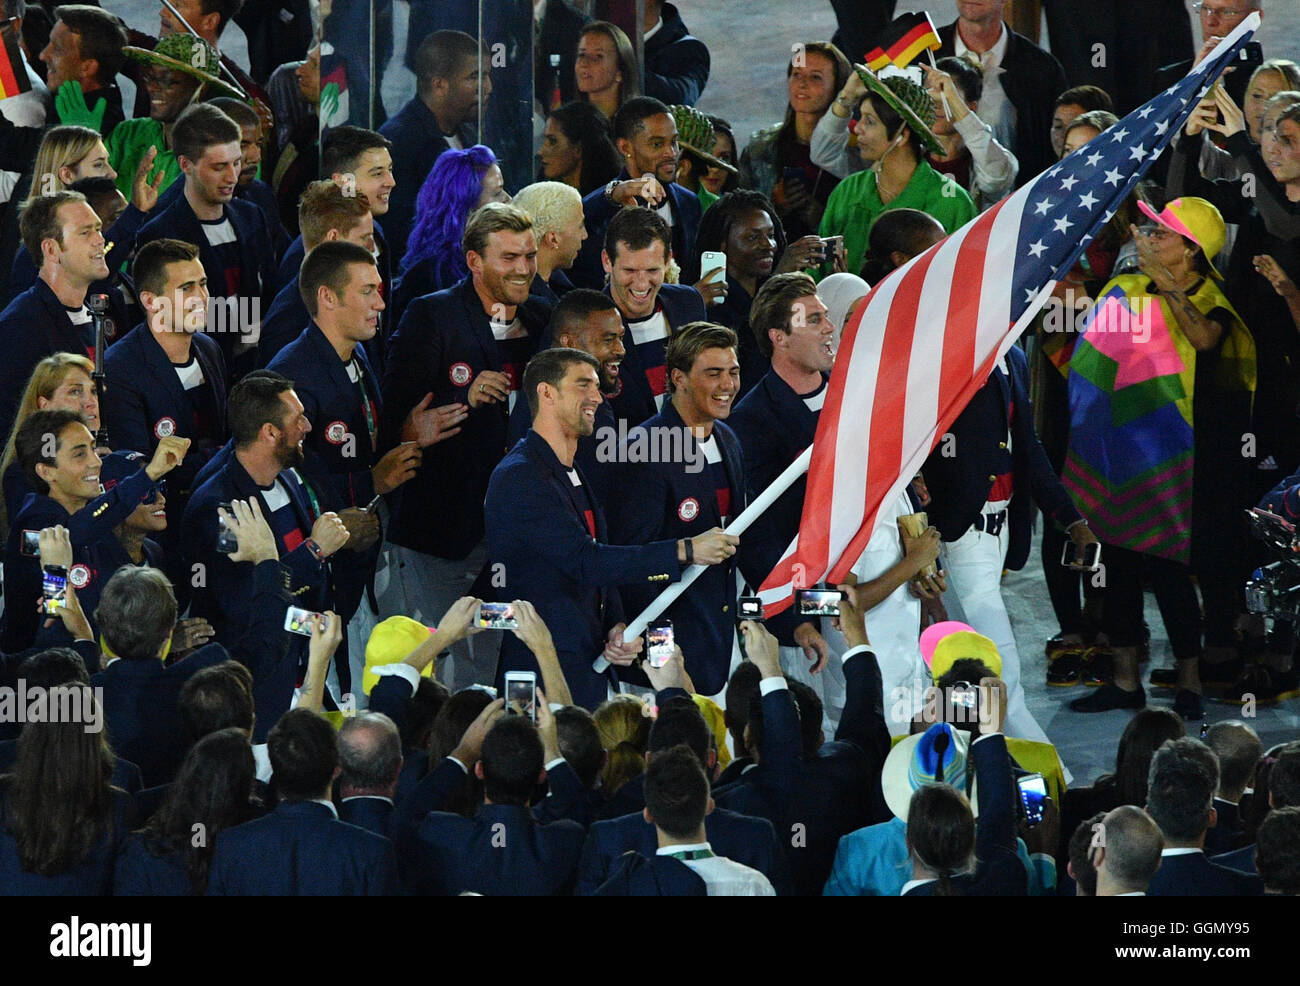 Rio de Janeiro, Brazil. 5th Aug, 2016. Flag bearer Michael Phelps from the USA and the U.S. Olympic team arrive during the opening ceremony of the Rio 2016 Olympic Games at the Maracana stadium in Rio de Janeiro, Brazil, 5 August 2016. Photo: Lukas Schulze/dpa/Alamy Live News Stock Photo